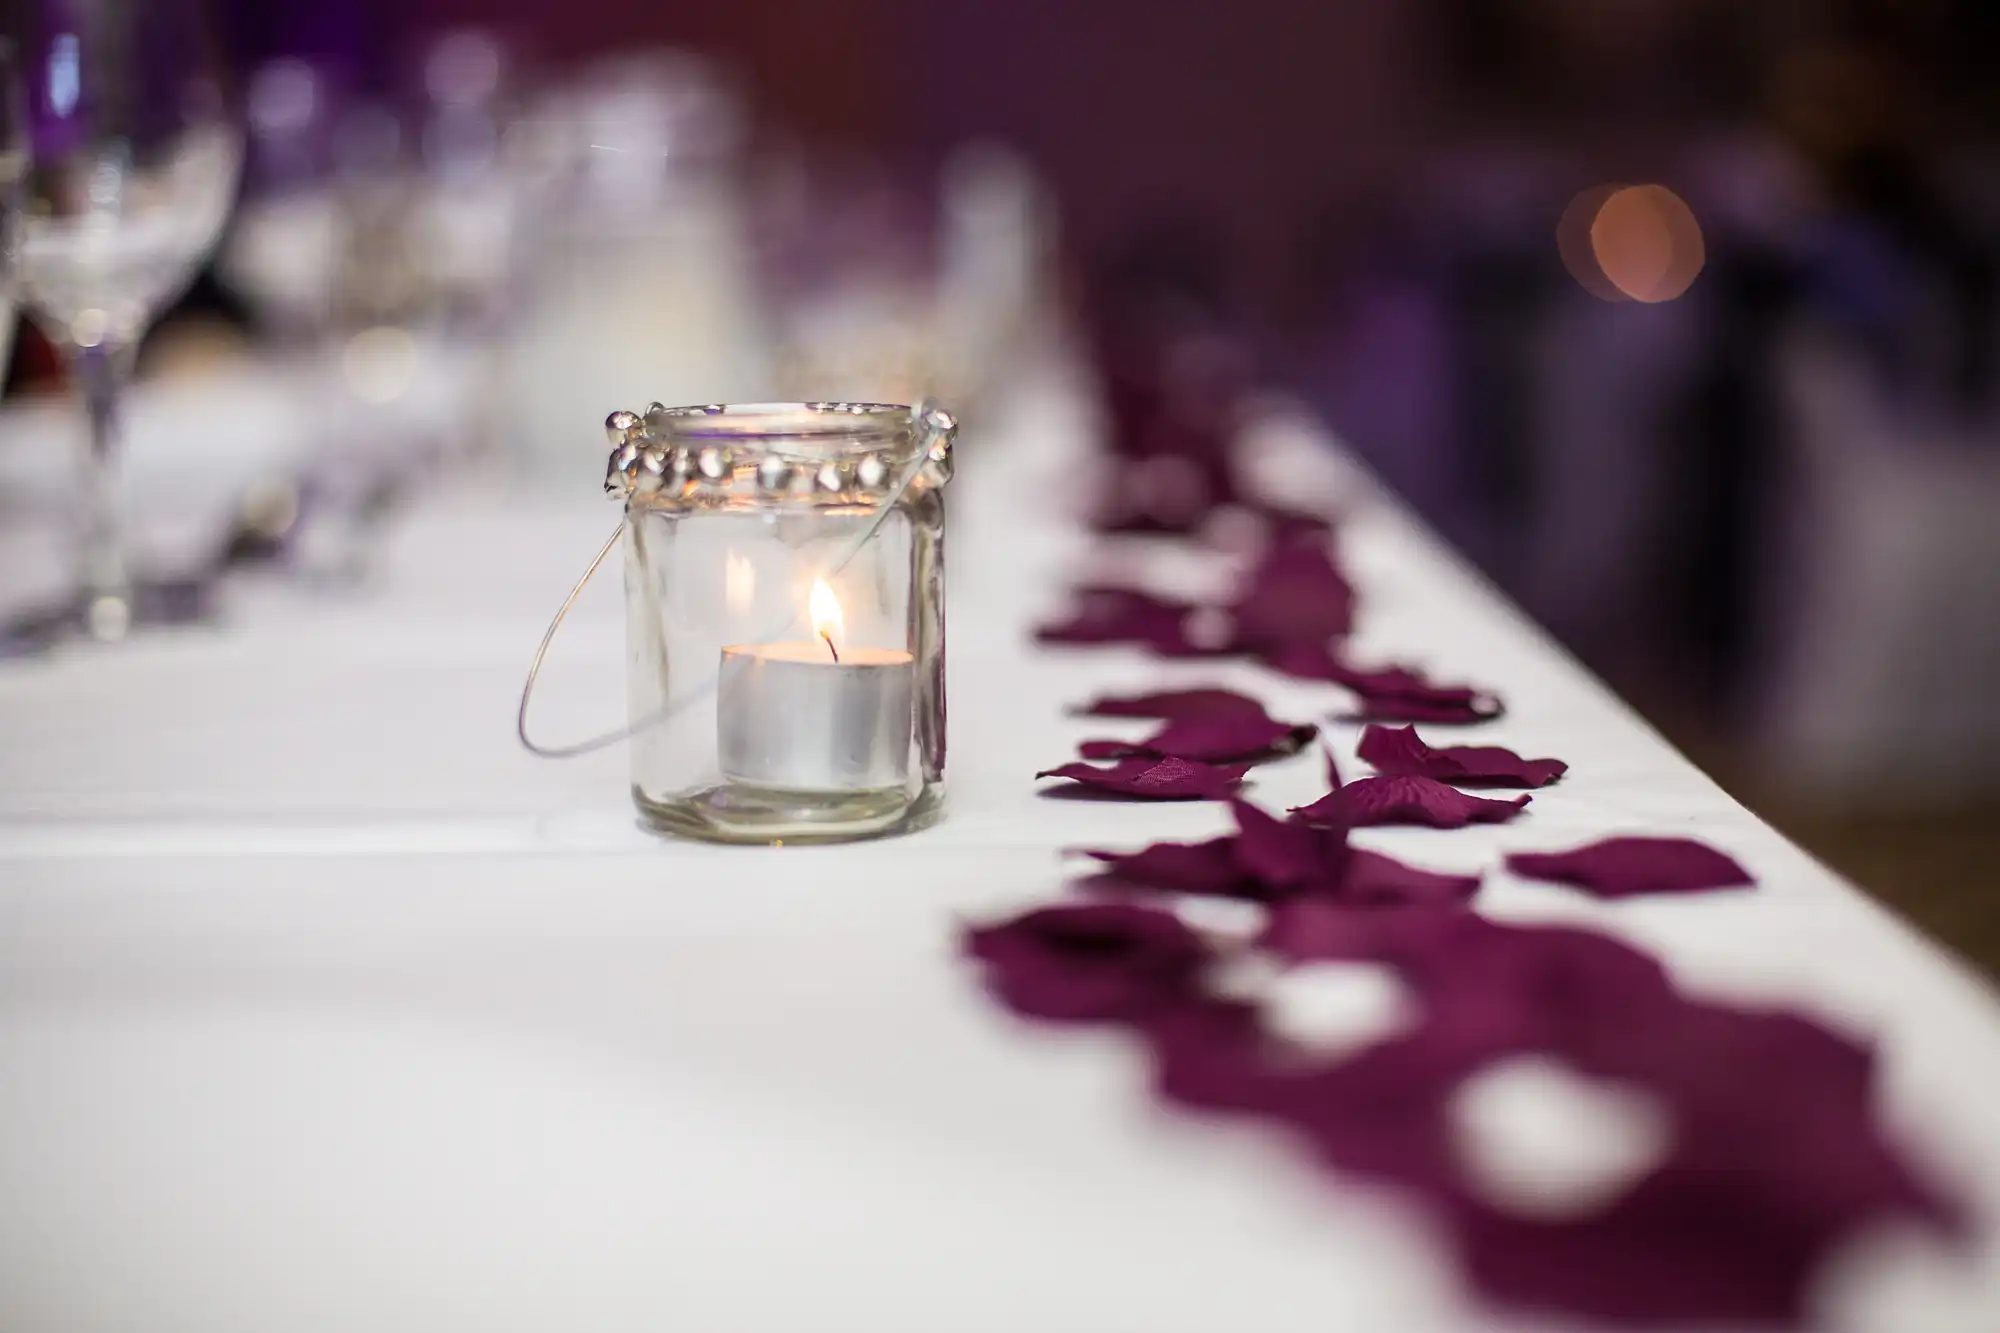 Glass candle holder with a lit candle on a banquet table decorated with purple petals, focusing on the foreground with a blurred background.